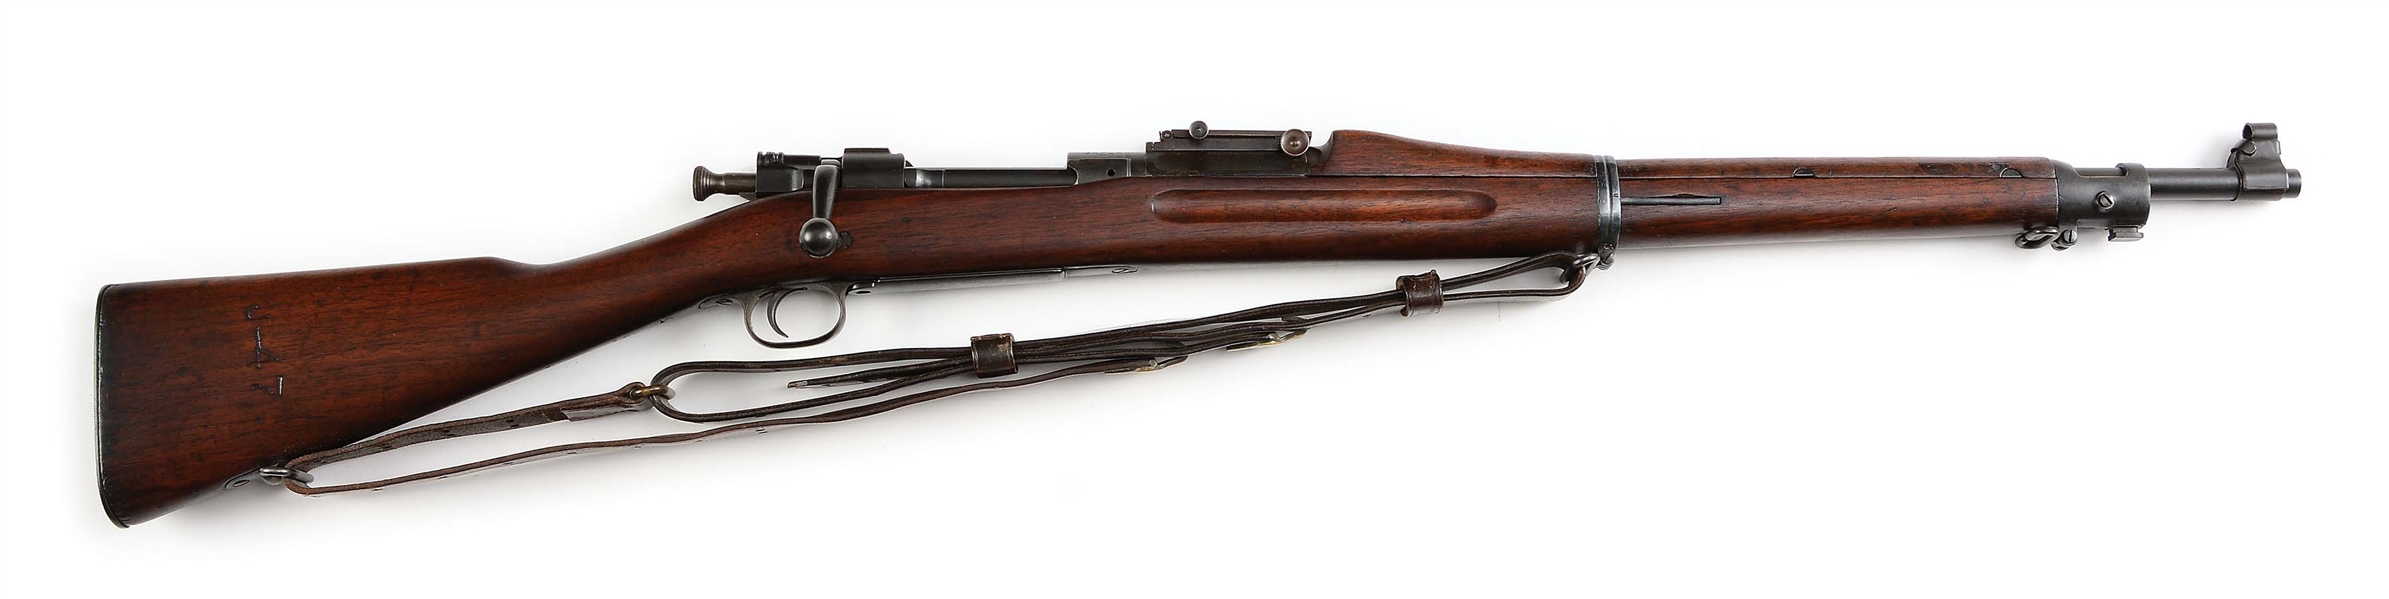 (C) SPRINGFIELD MODEL 1903 RIFLE DATED 7-17.